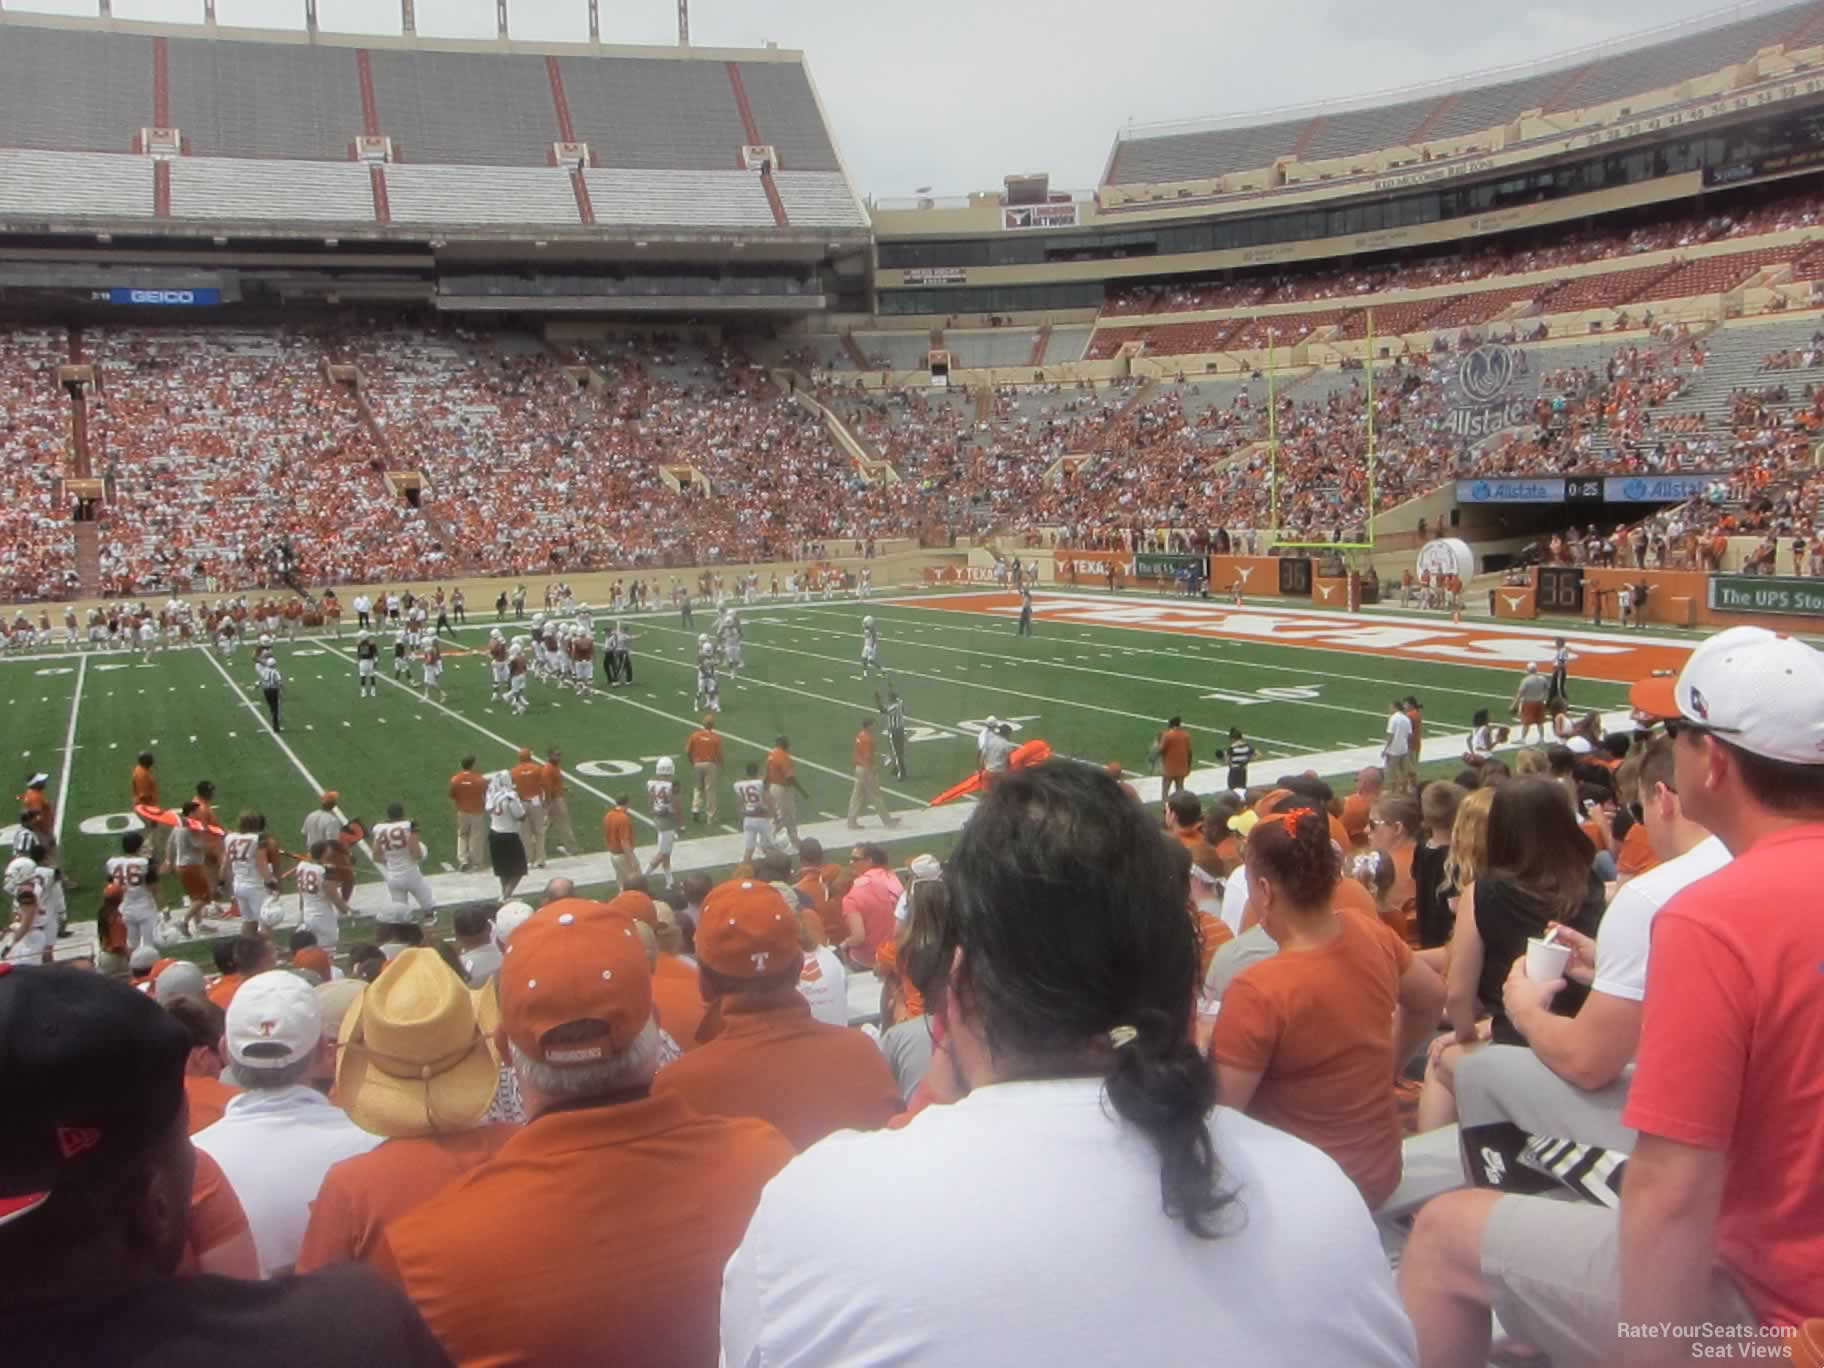 section 28, row 18 seat view  - dkr-texas memorial stadium